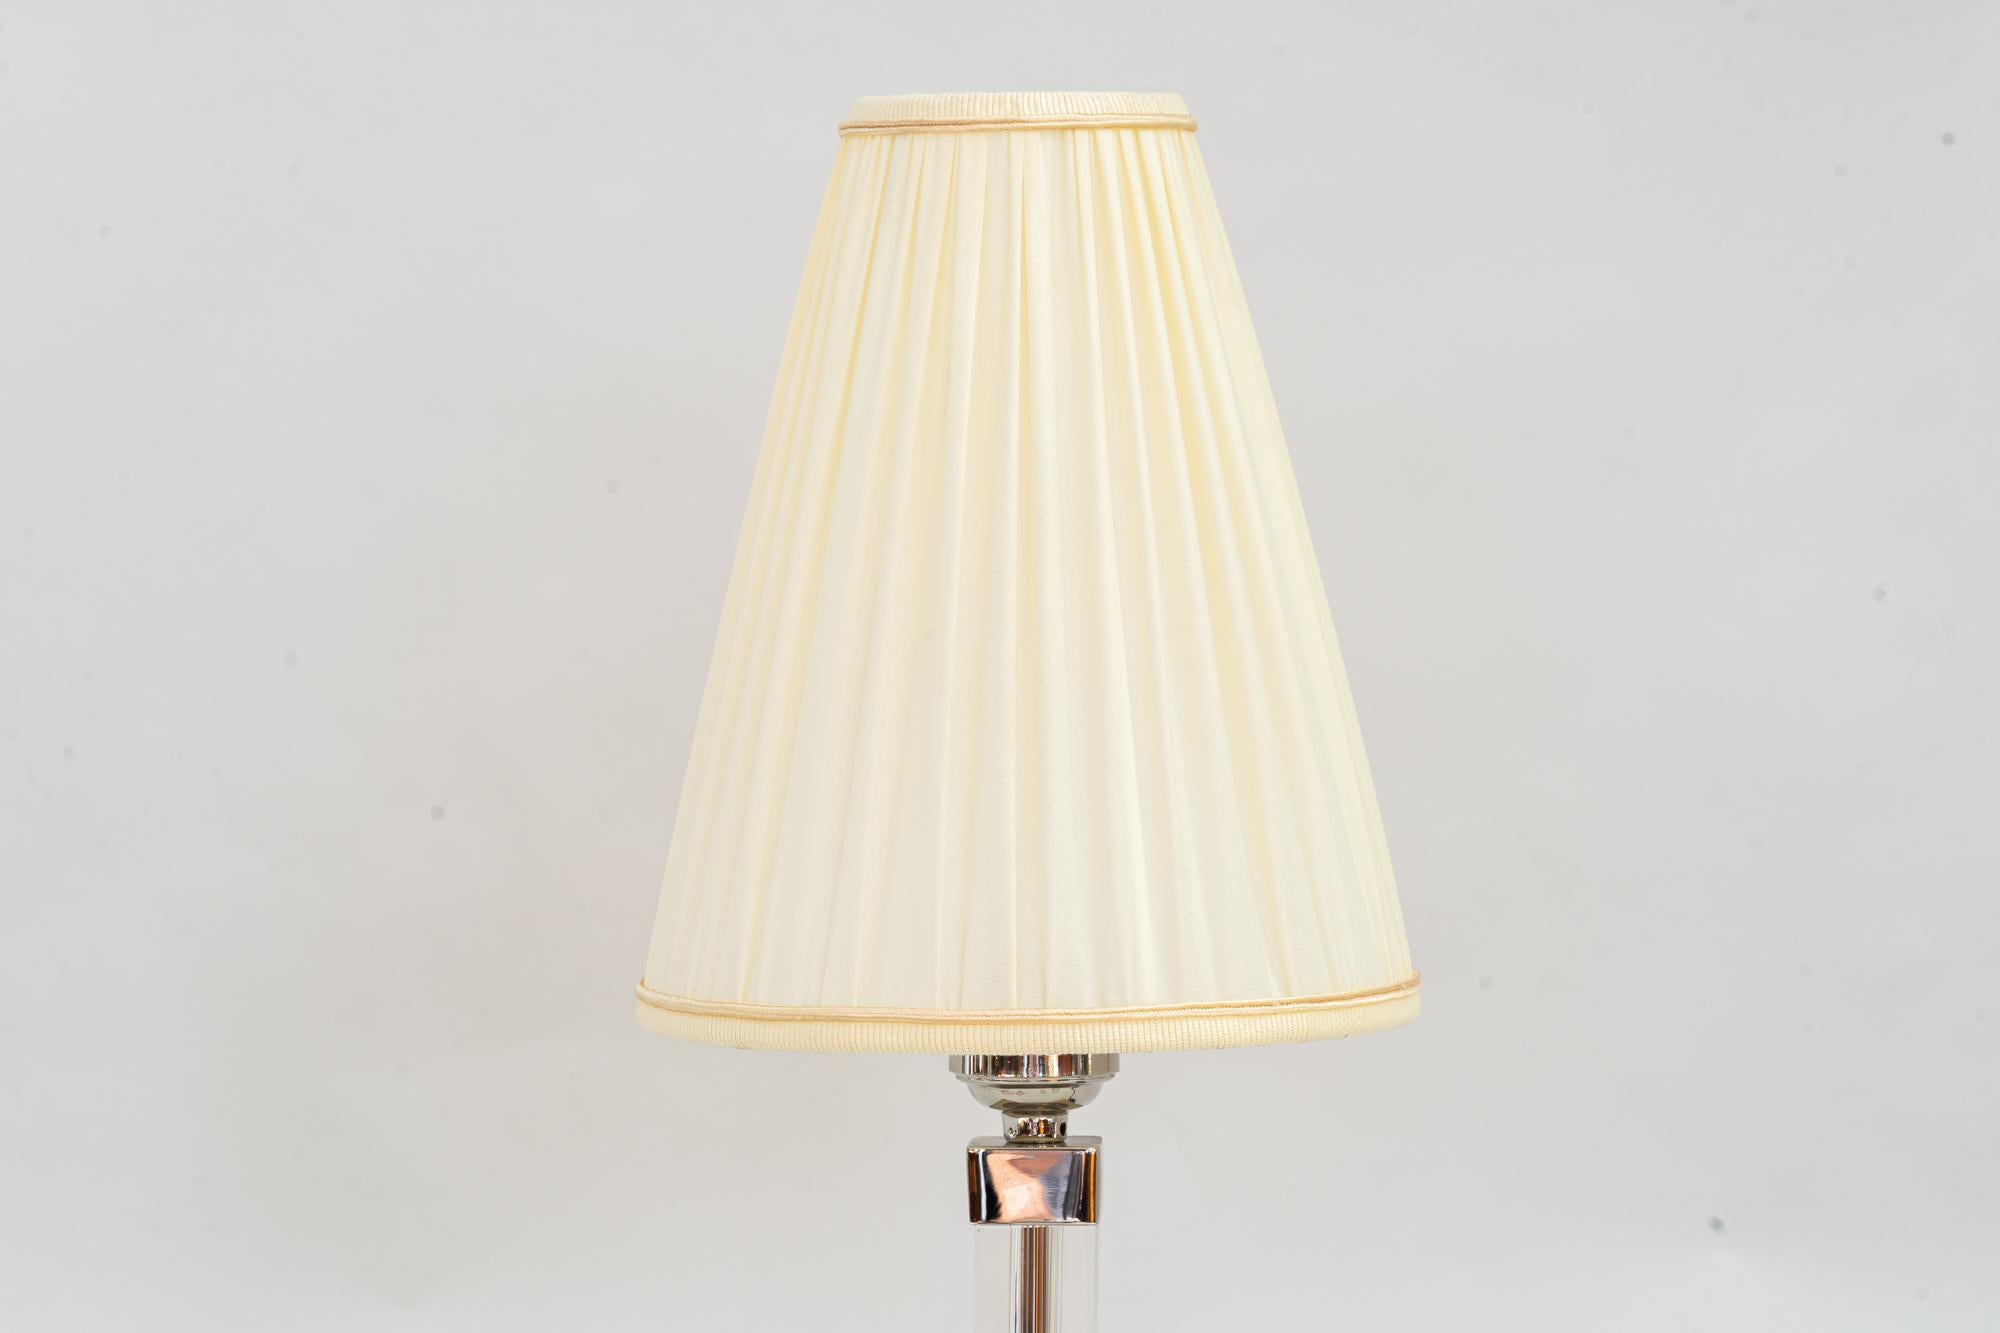 Art Deco Baklowits glass table lamp with fabric shade vienna around 1920s

Glas and brass ( nickel - plated )
The fabric shade is replaced ( New ).